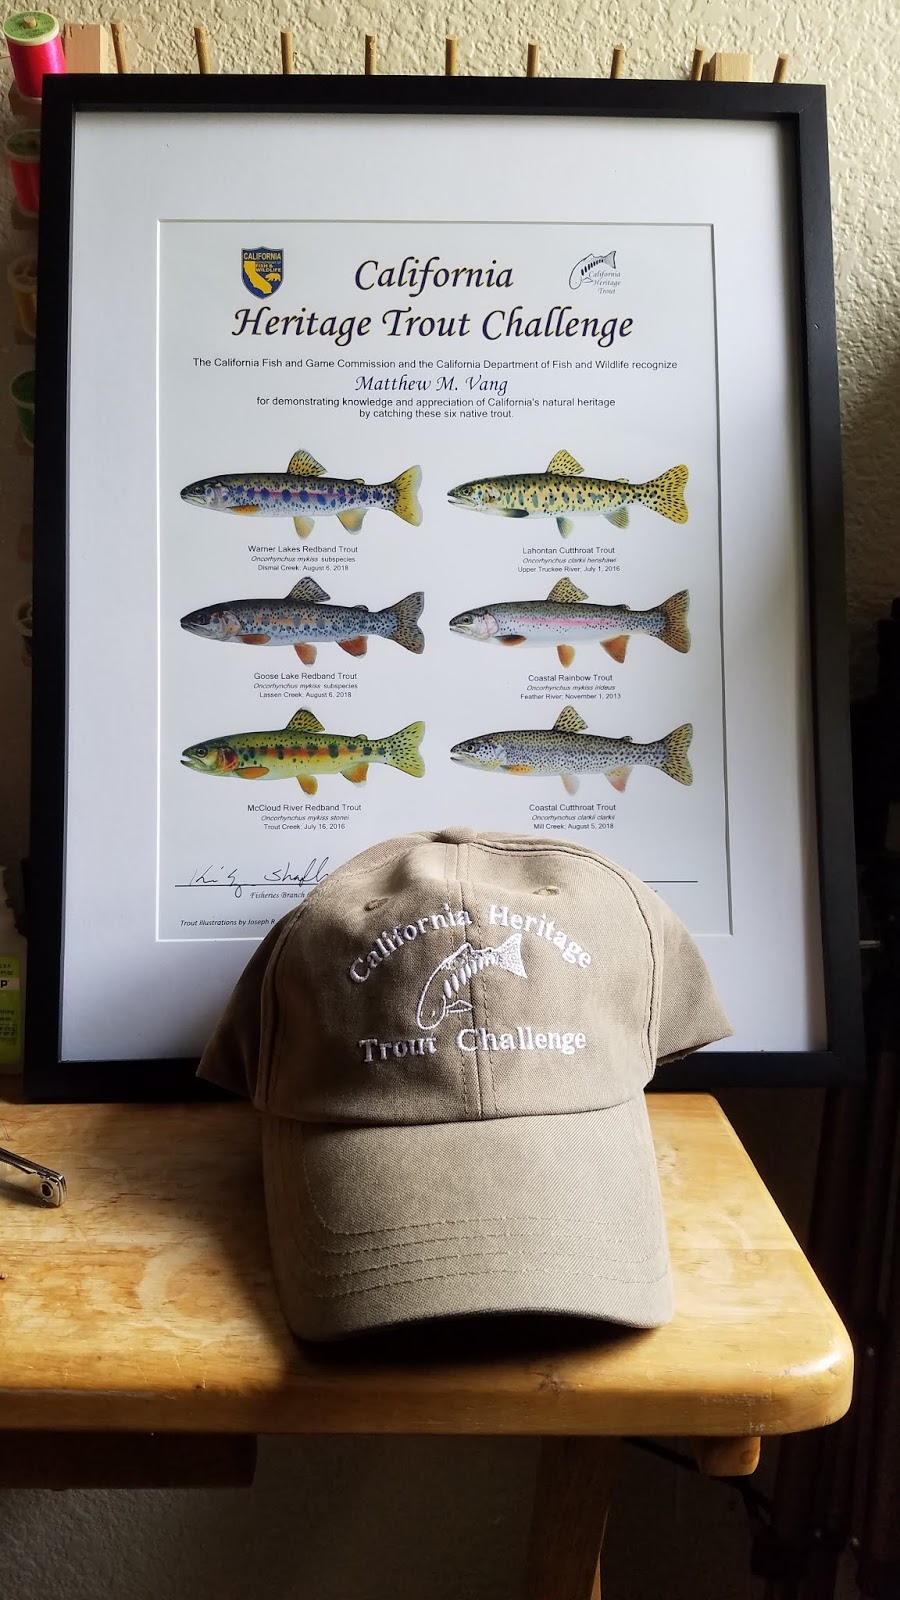 Heritage Trout Challenge: Through The Coast and Mountains